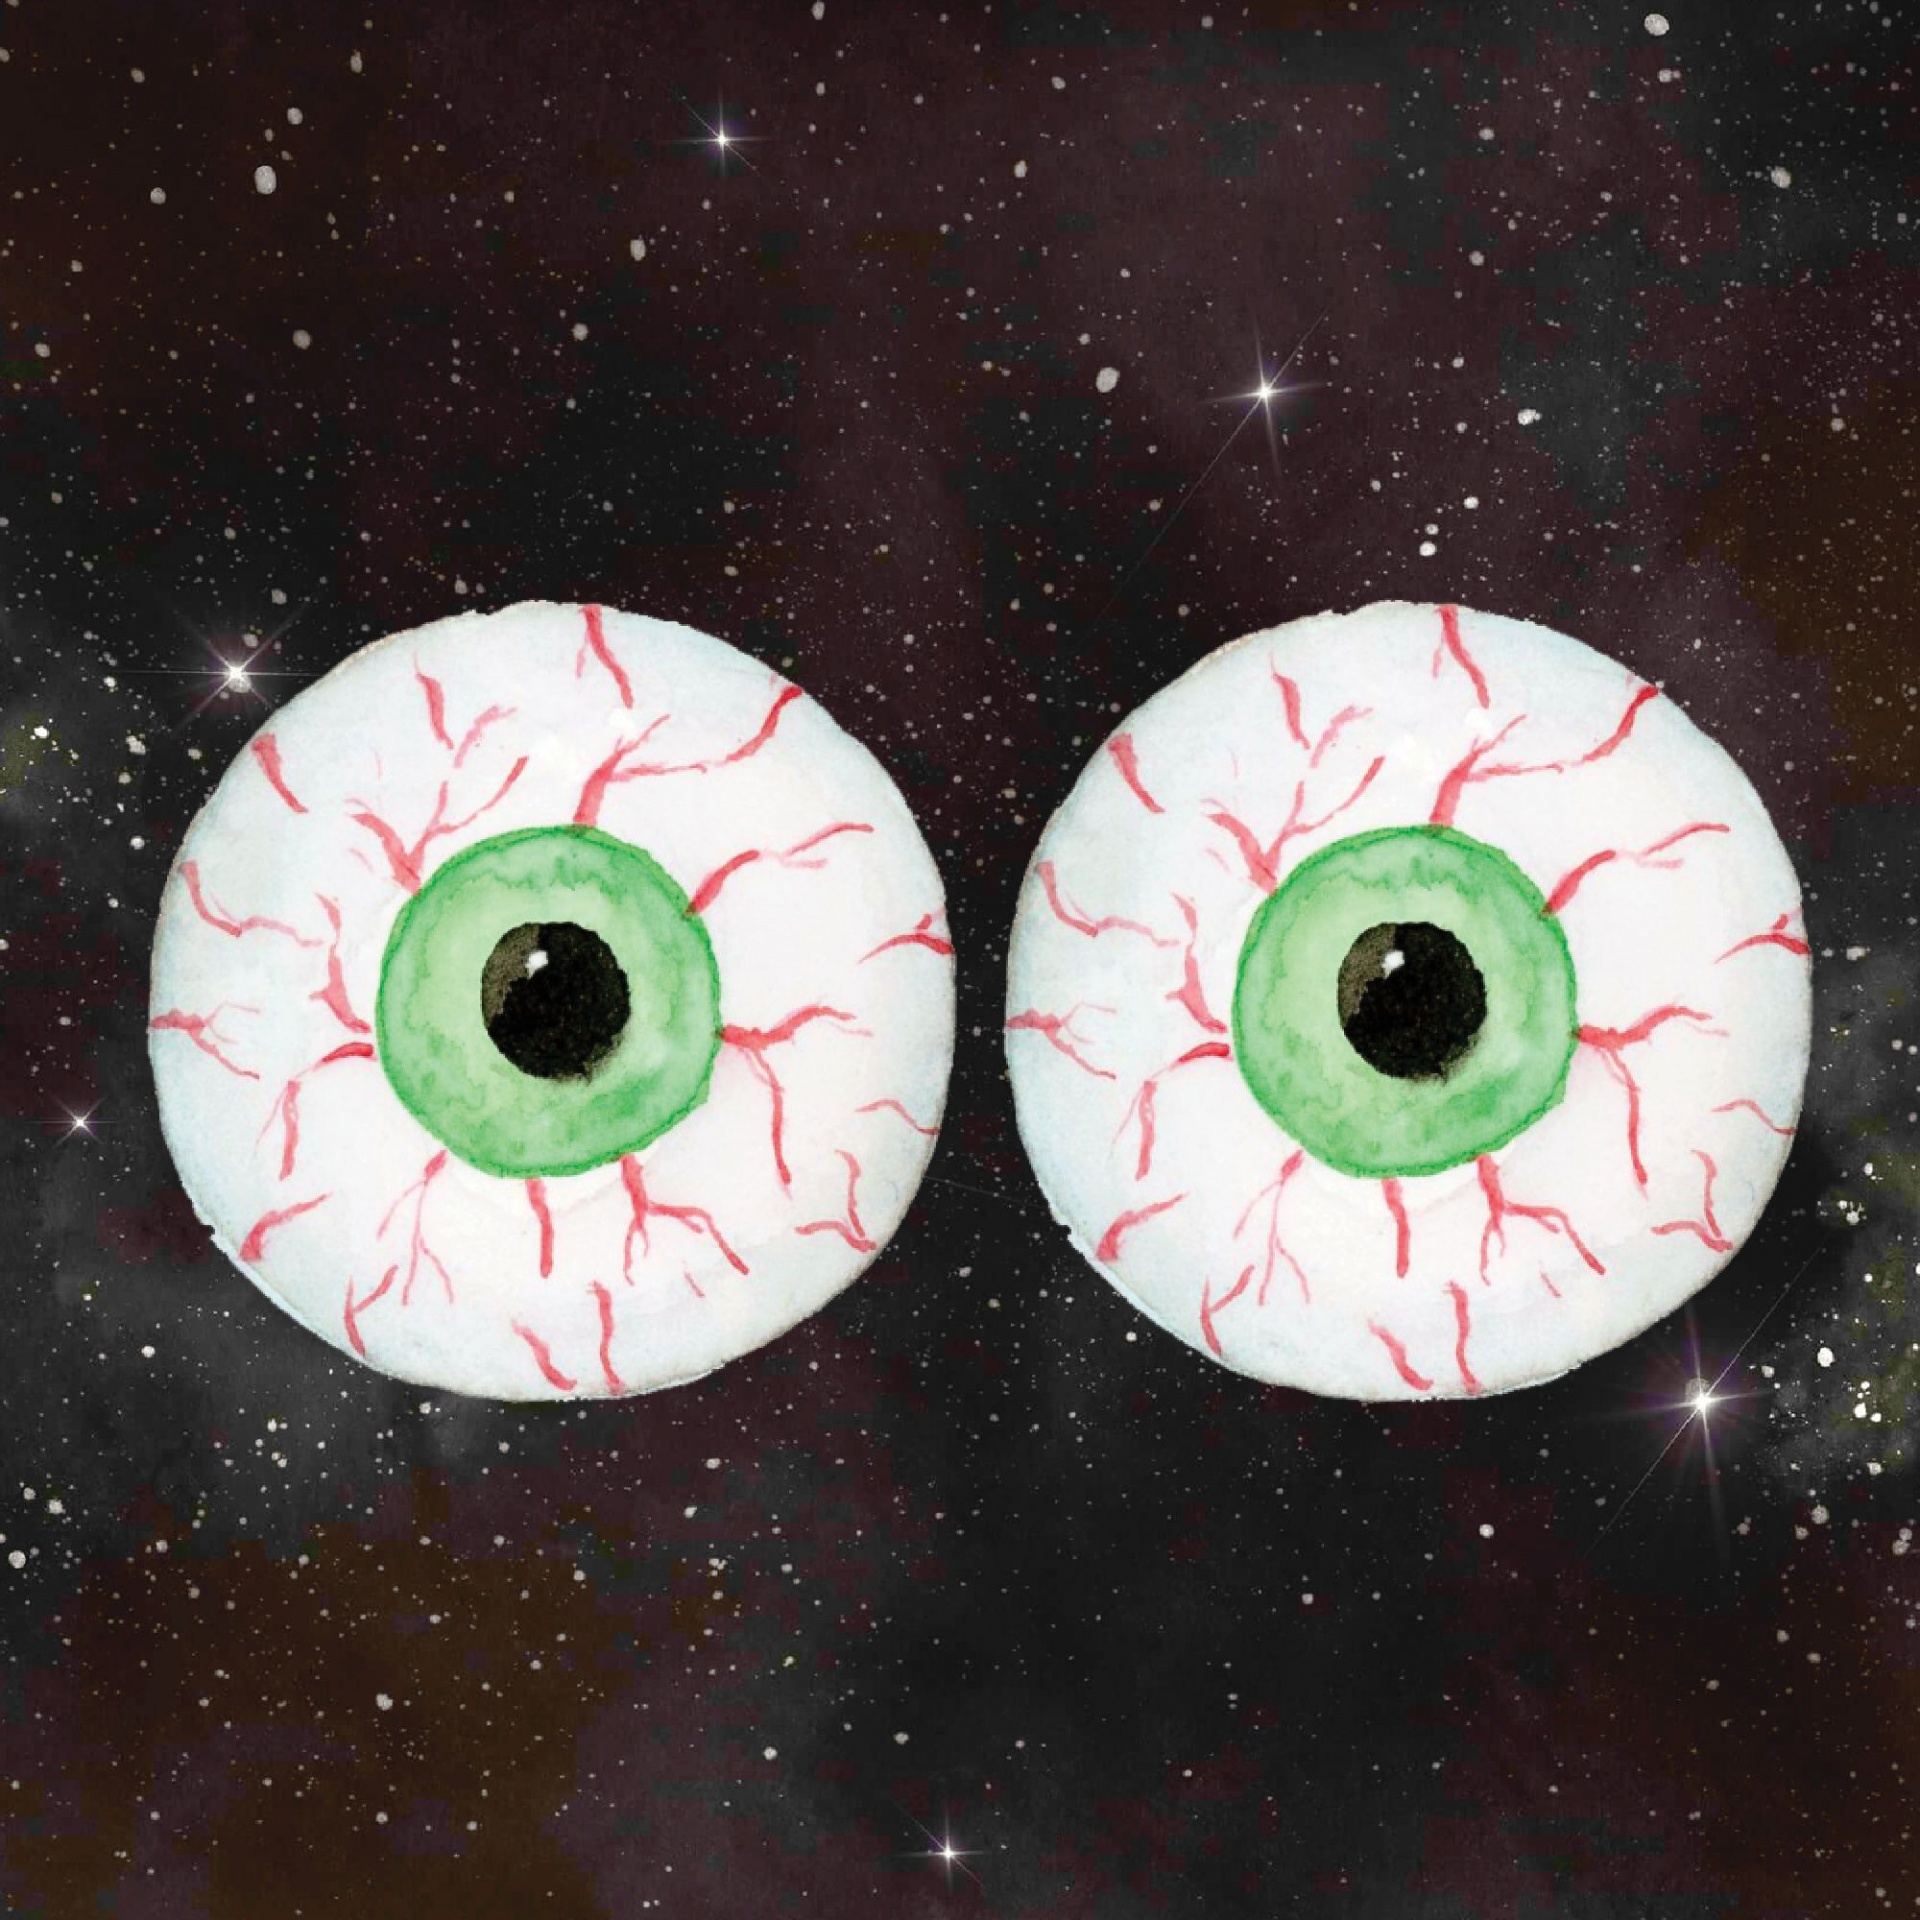 a pair of scary eyeballs in the night sky